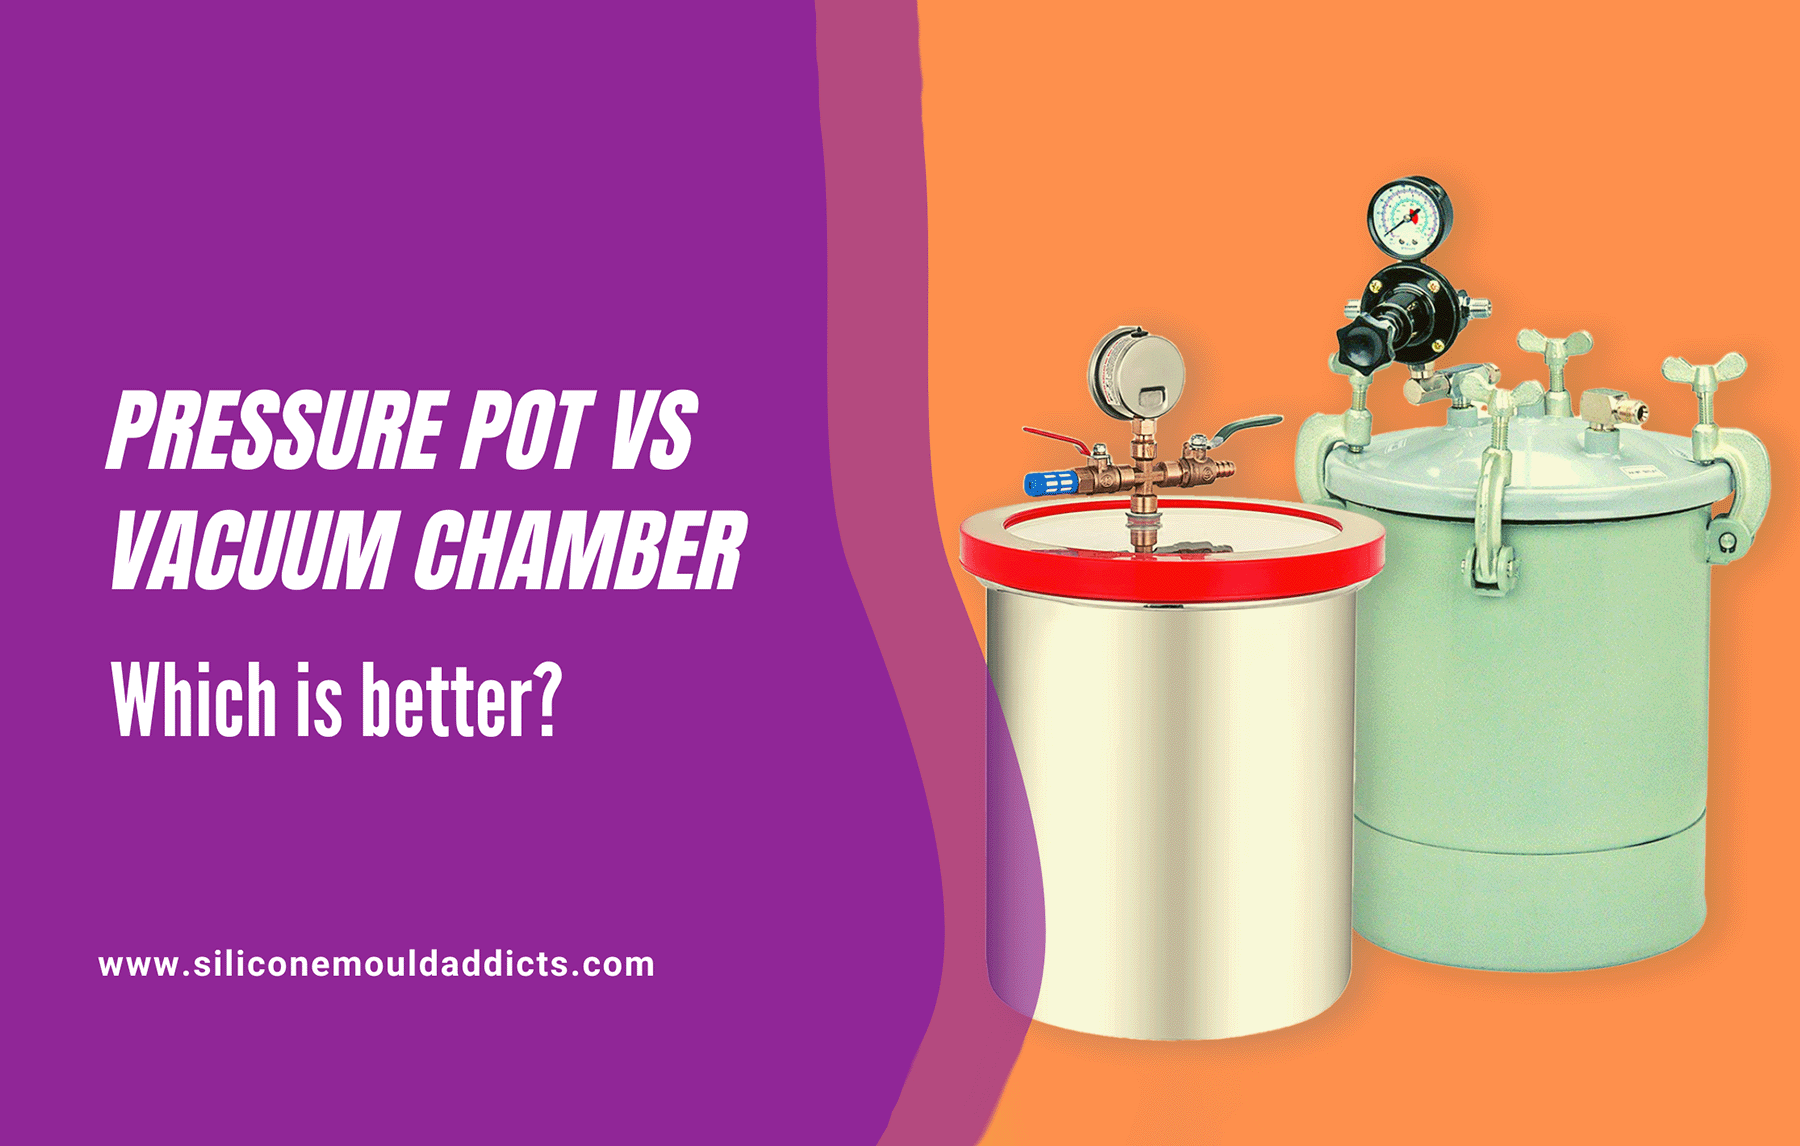 Pressure Pots vs Vacuum Chambers, which is better for removing bubbles